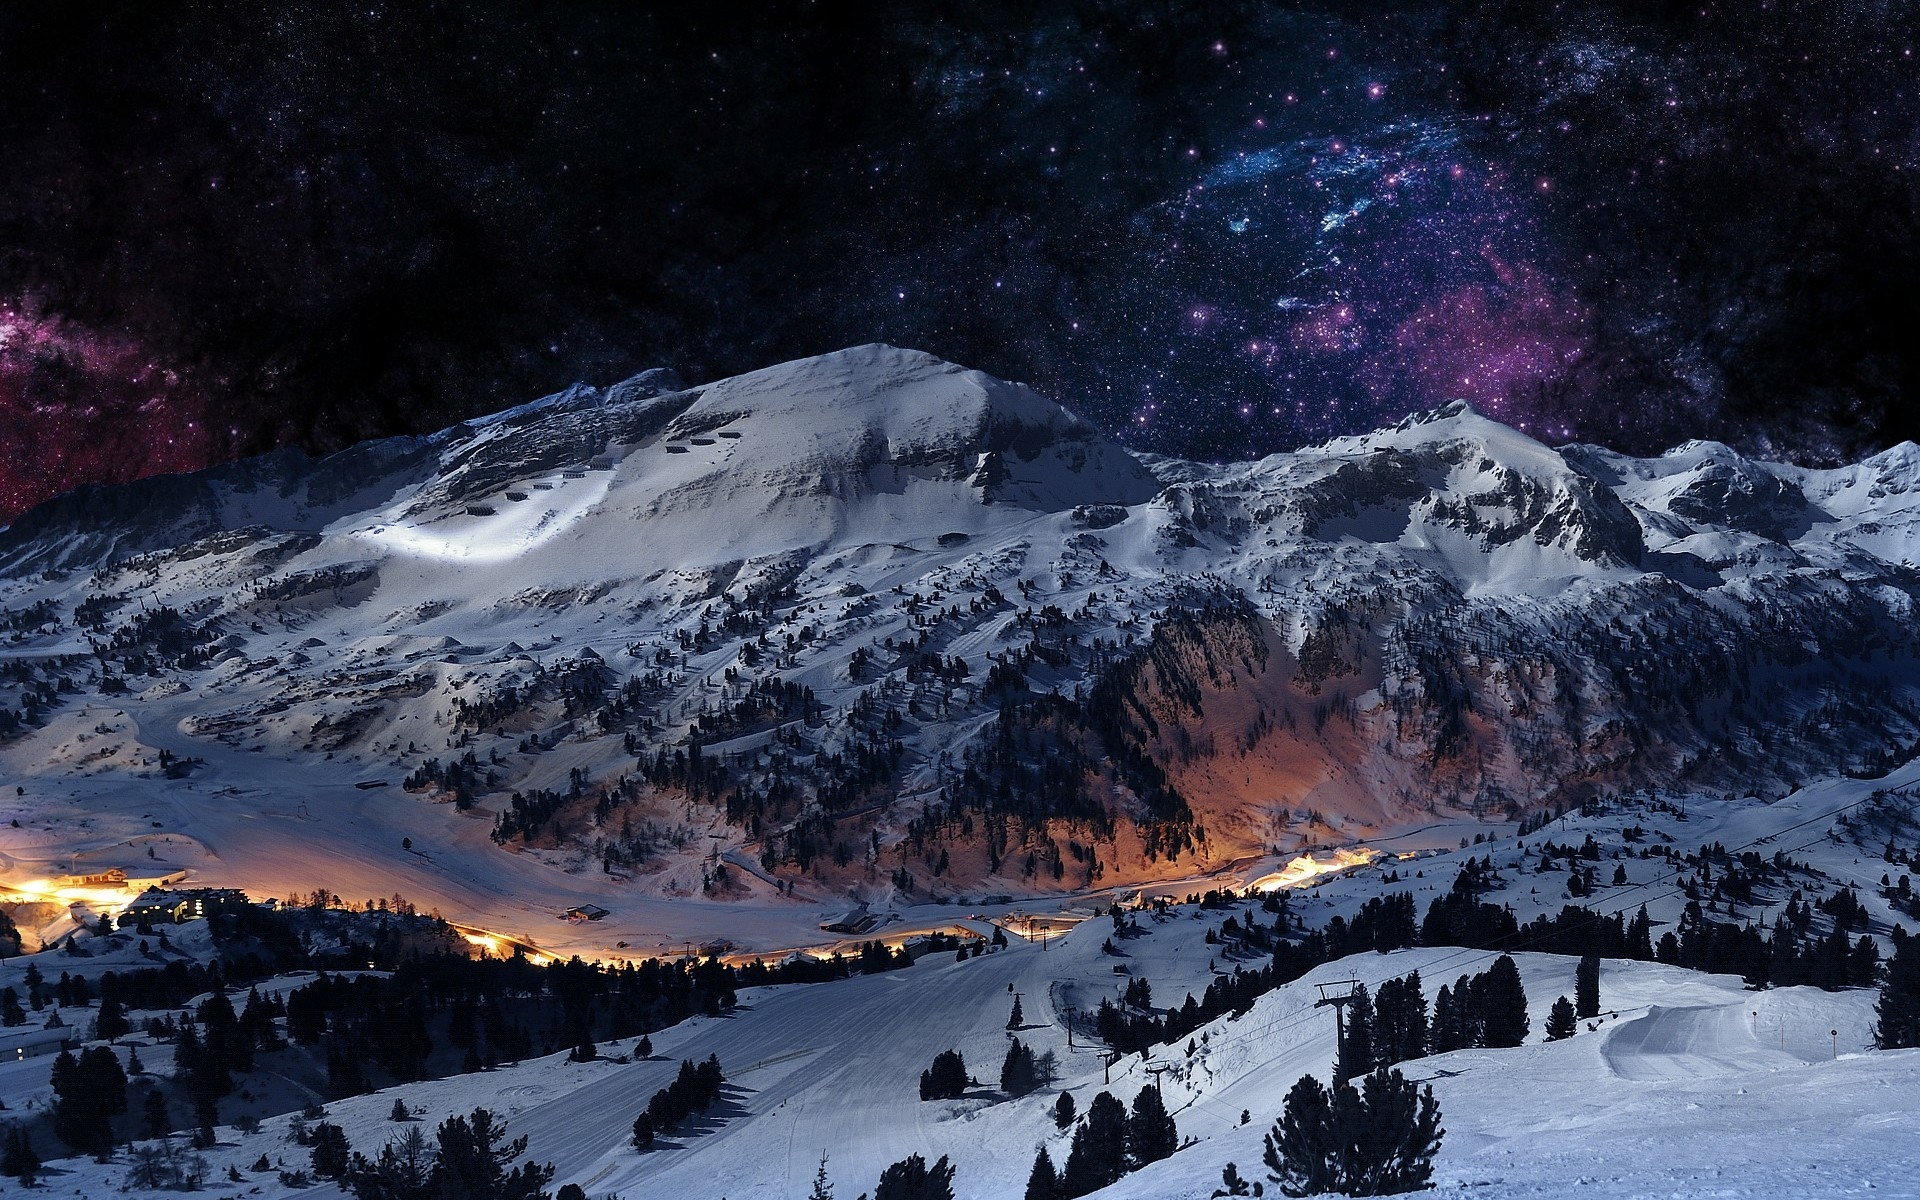 Unusual starry sky in the snowy mountains